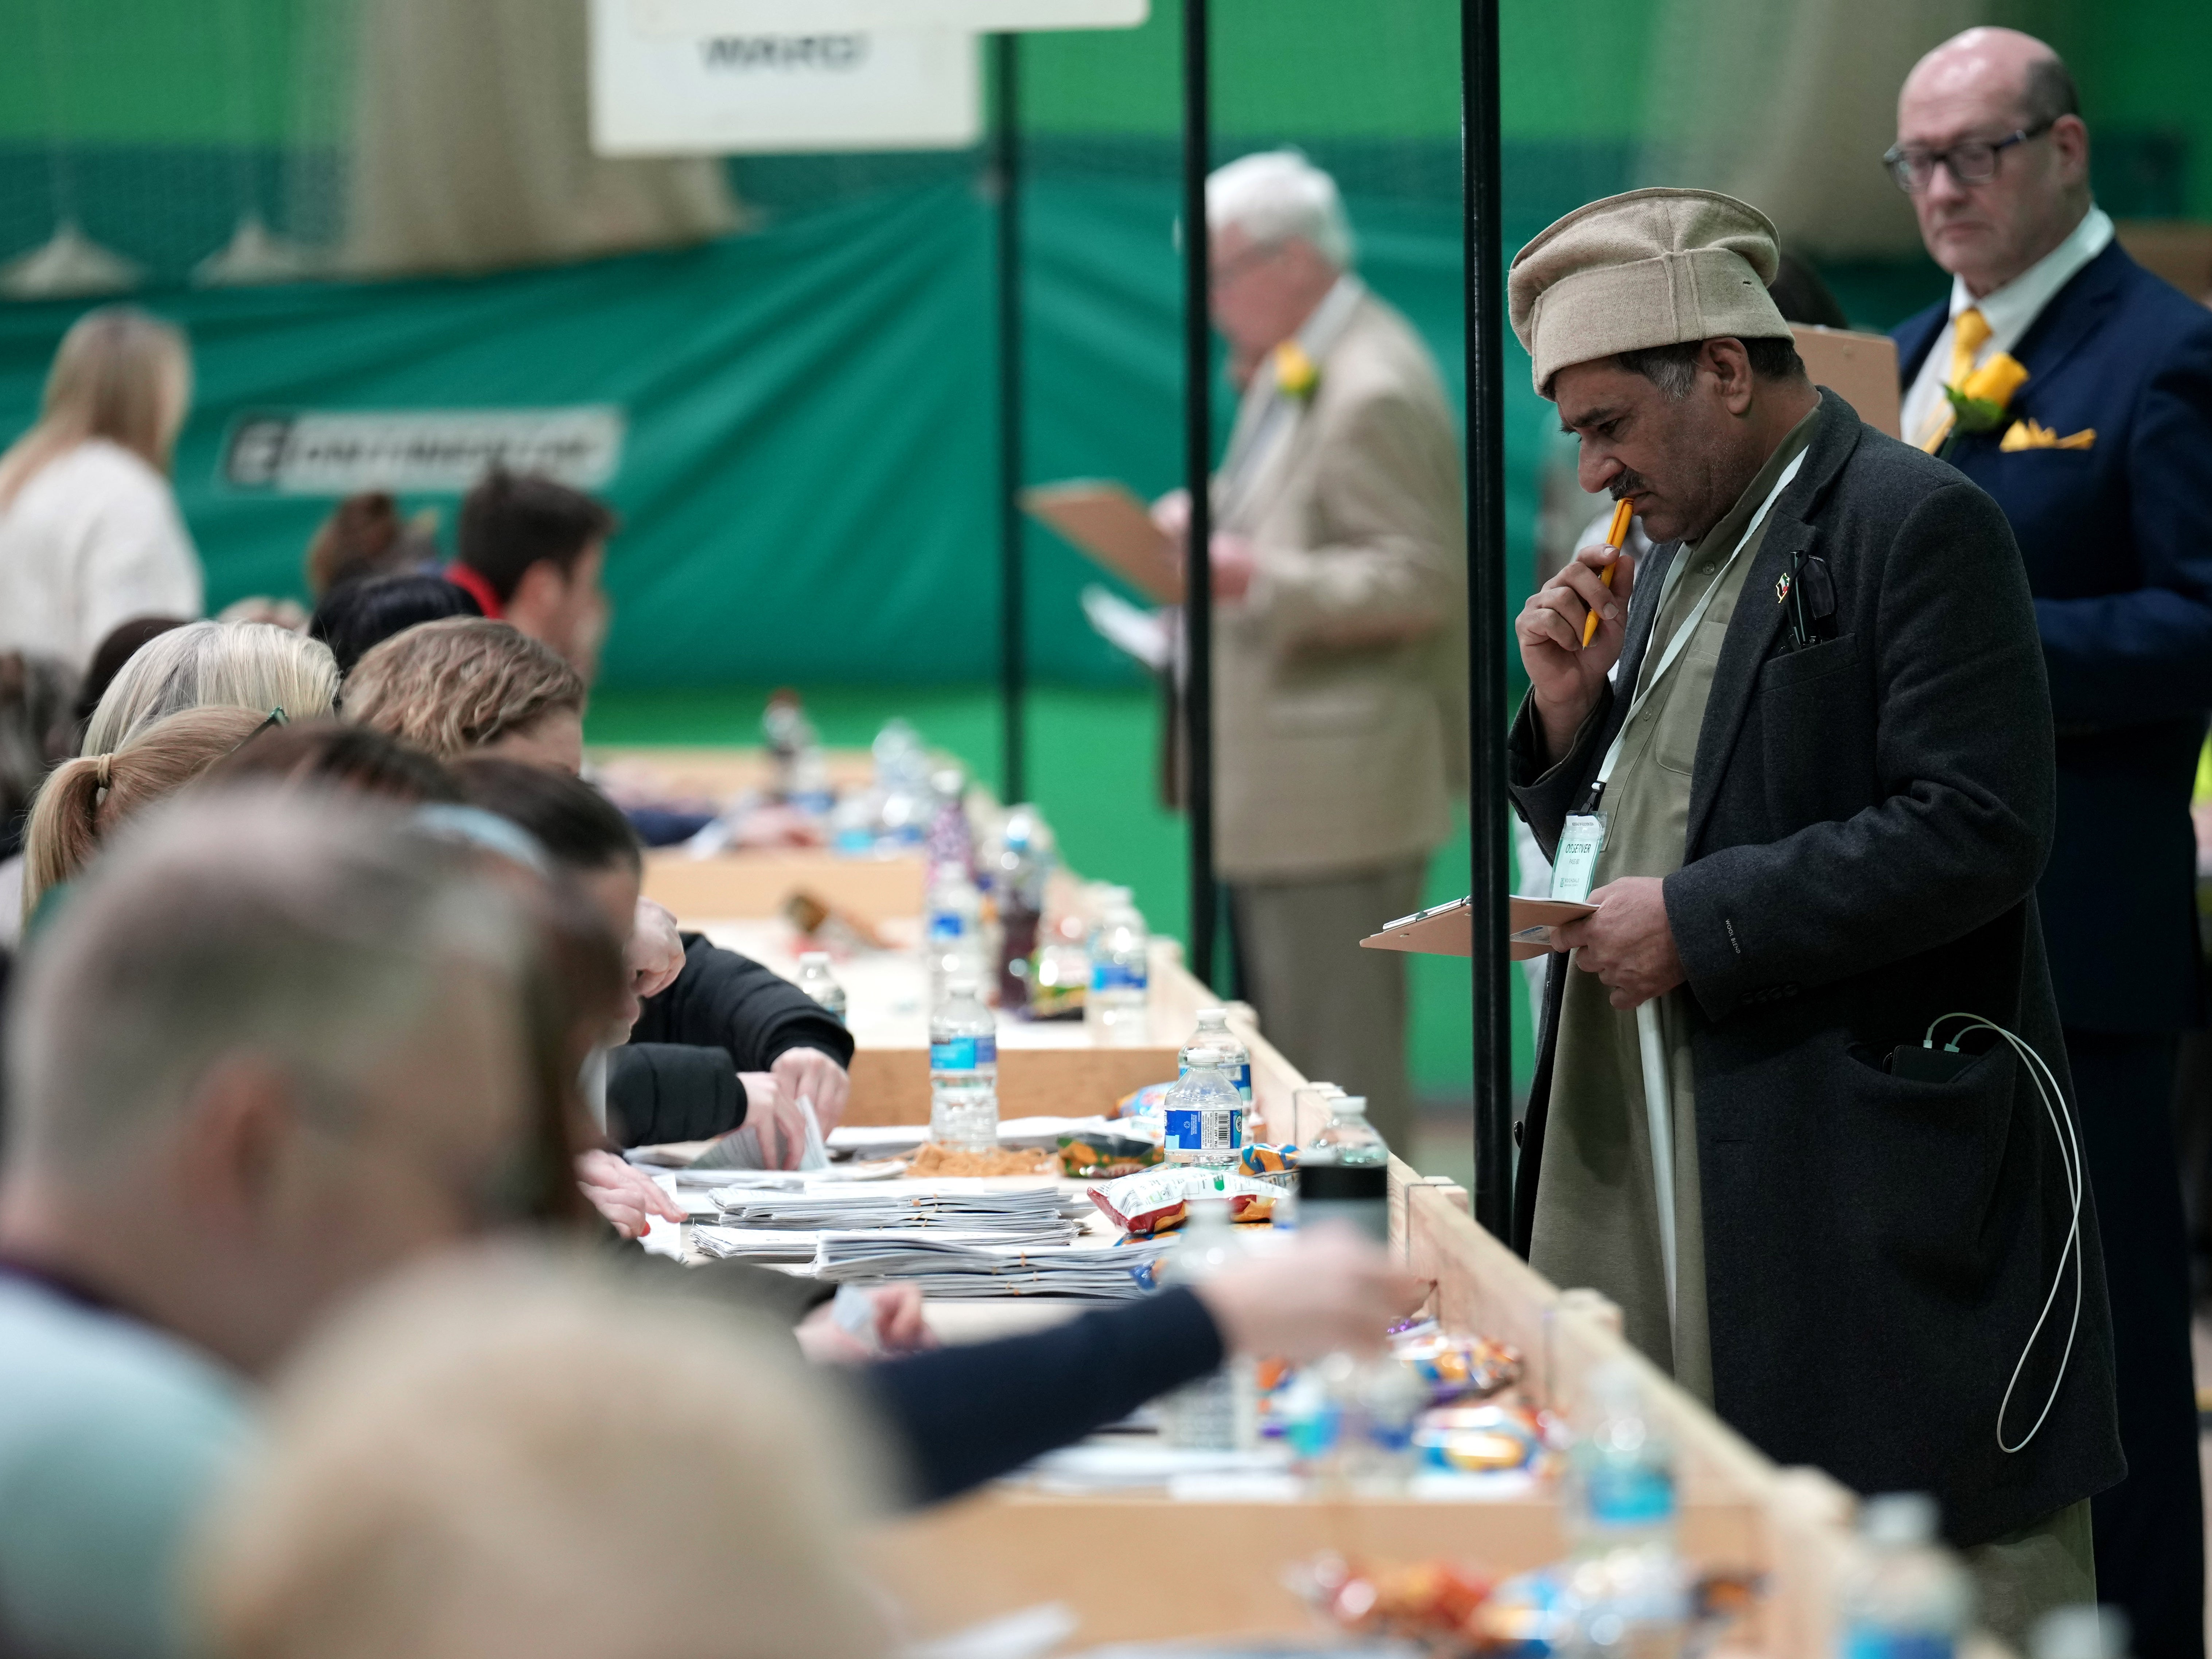 Officials count the votes in Rochdale after a chaotic and divisive campaign